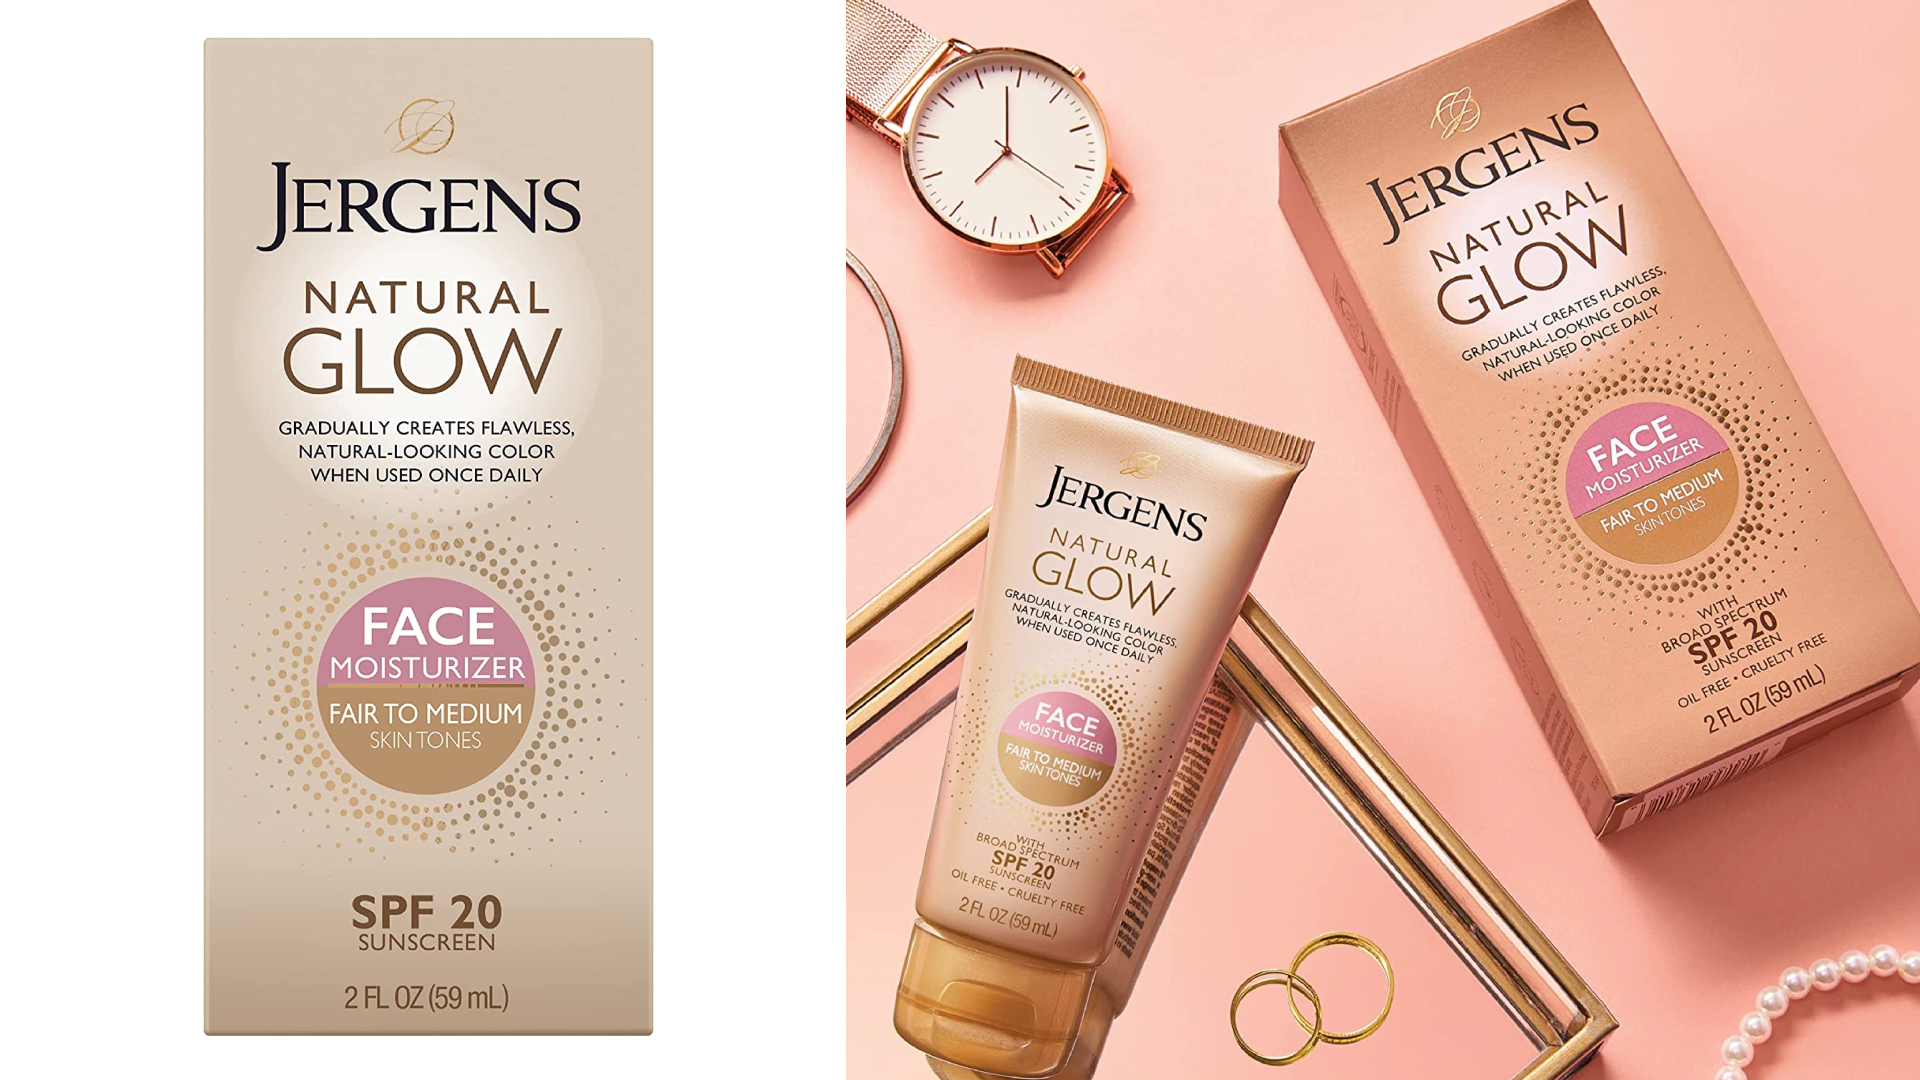 Jergens facial lotion glowing skin